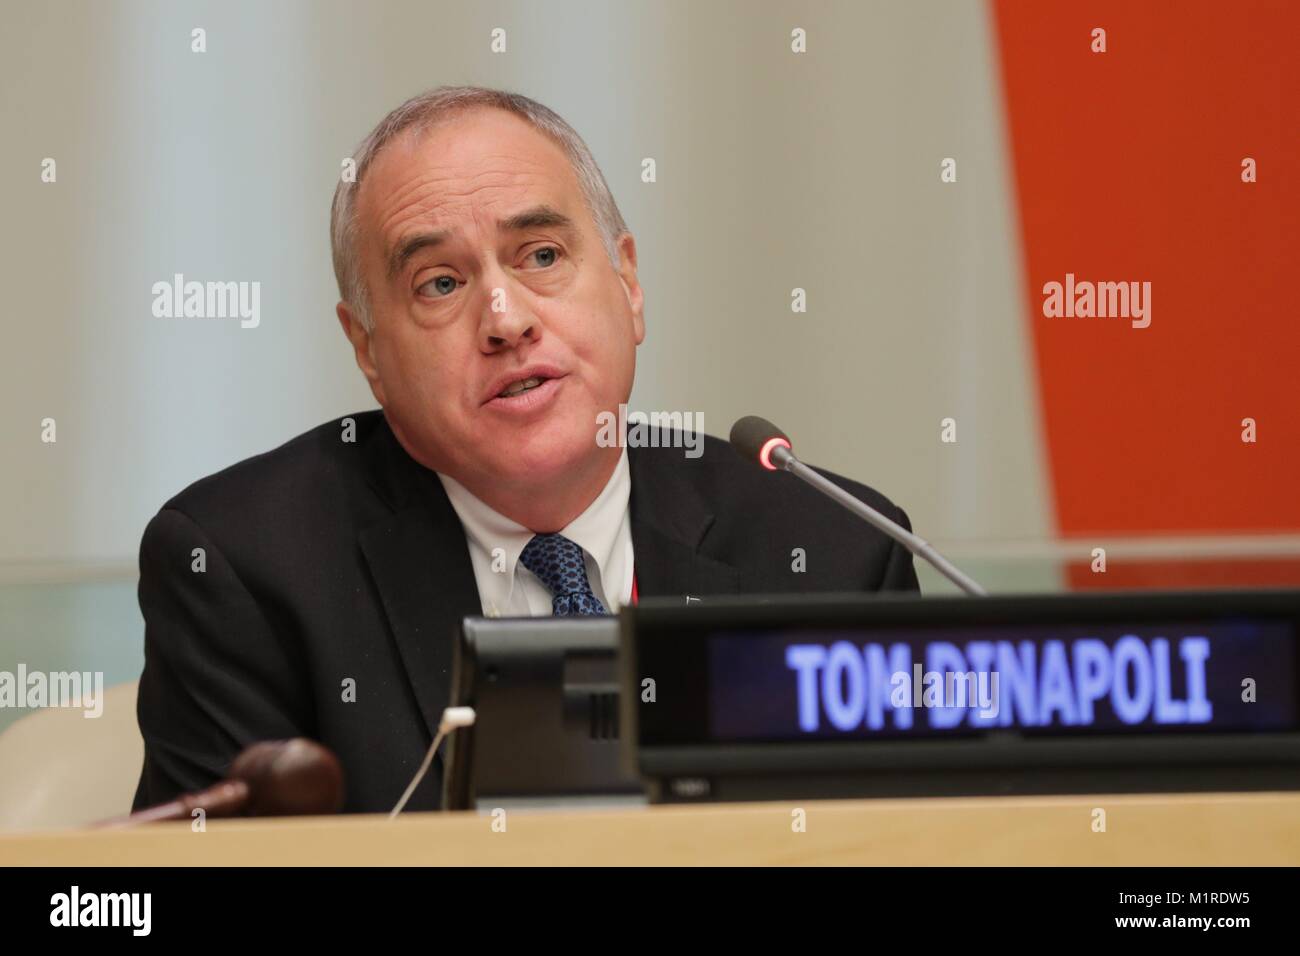 United Nations, New York, USA, January 31 2018 - Thomas P. DiNapoli the Comptroller of the state of New York During the 2018 Investor Summit on Climate Risk on the theme Capturing the Investment Opportunities of the Paris Agreement today at the UN Headquarters in New York City. Photo: Luiz Rampelotto/EuropaNewswire *** Local Caption *** 00005965 | usage worldwide Credit: dpa picture alliance/Alamy Live News Stock Photo